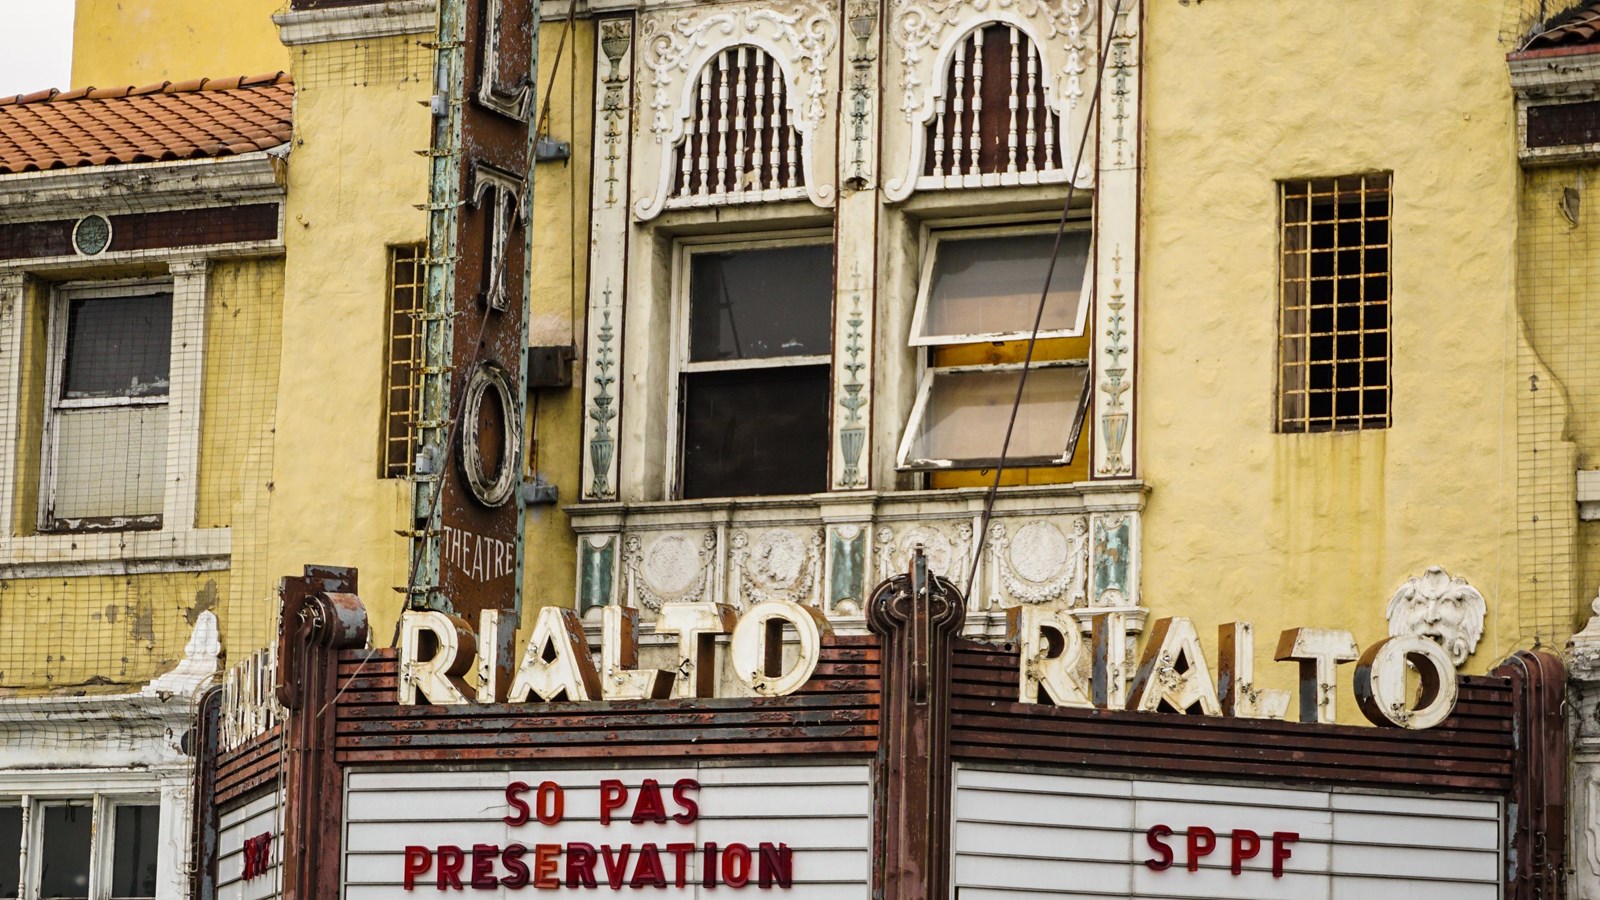 A large tan building with an ornate facade and a letter board that reads above 